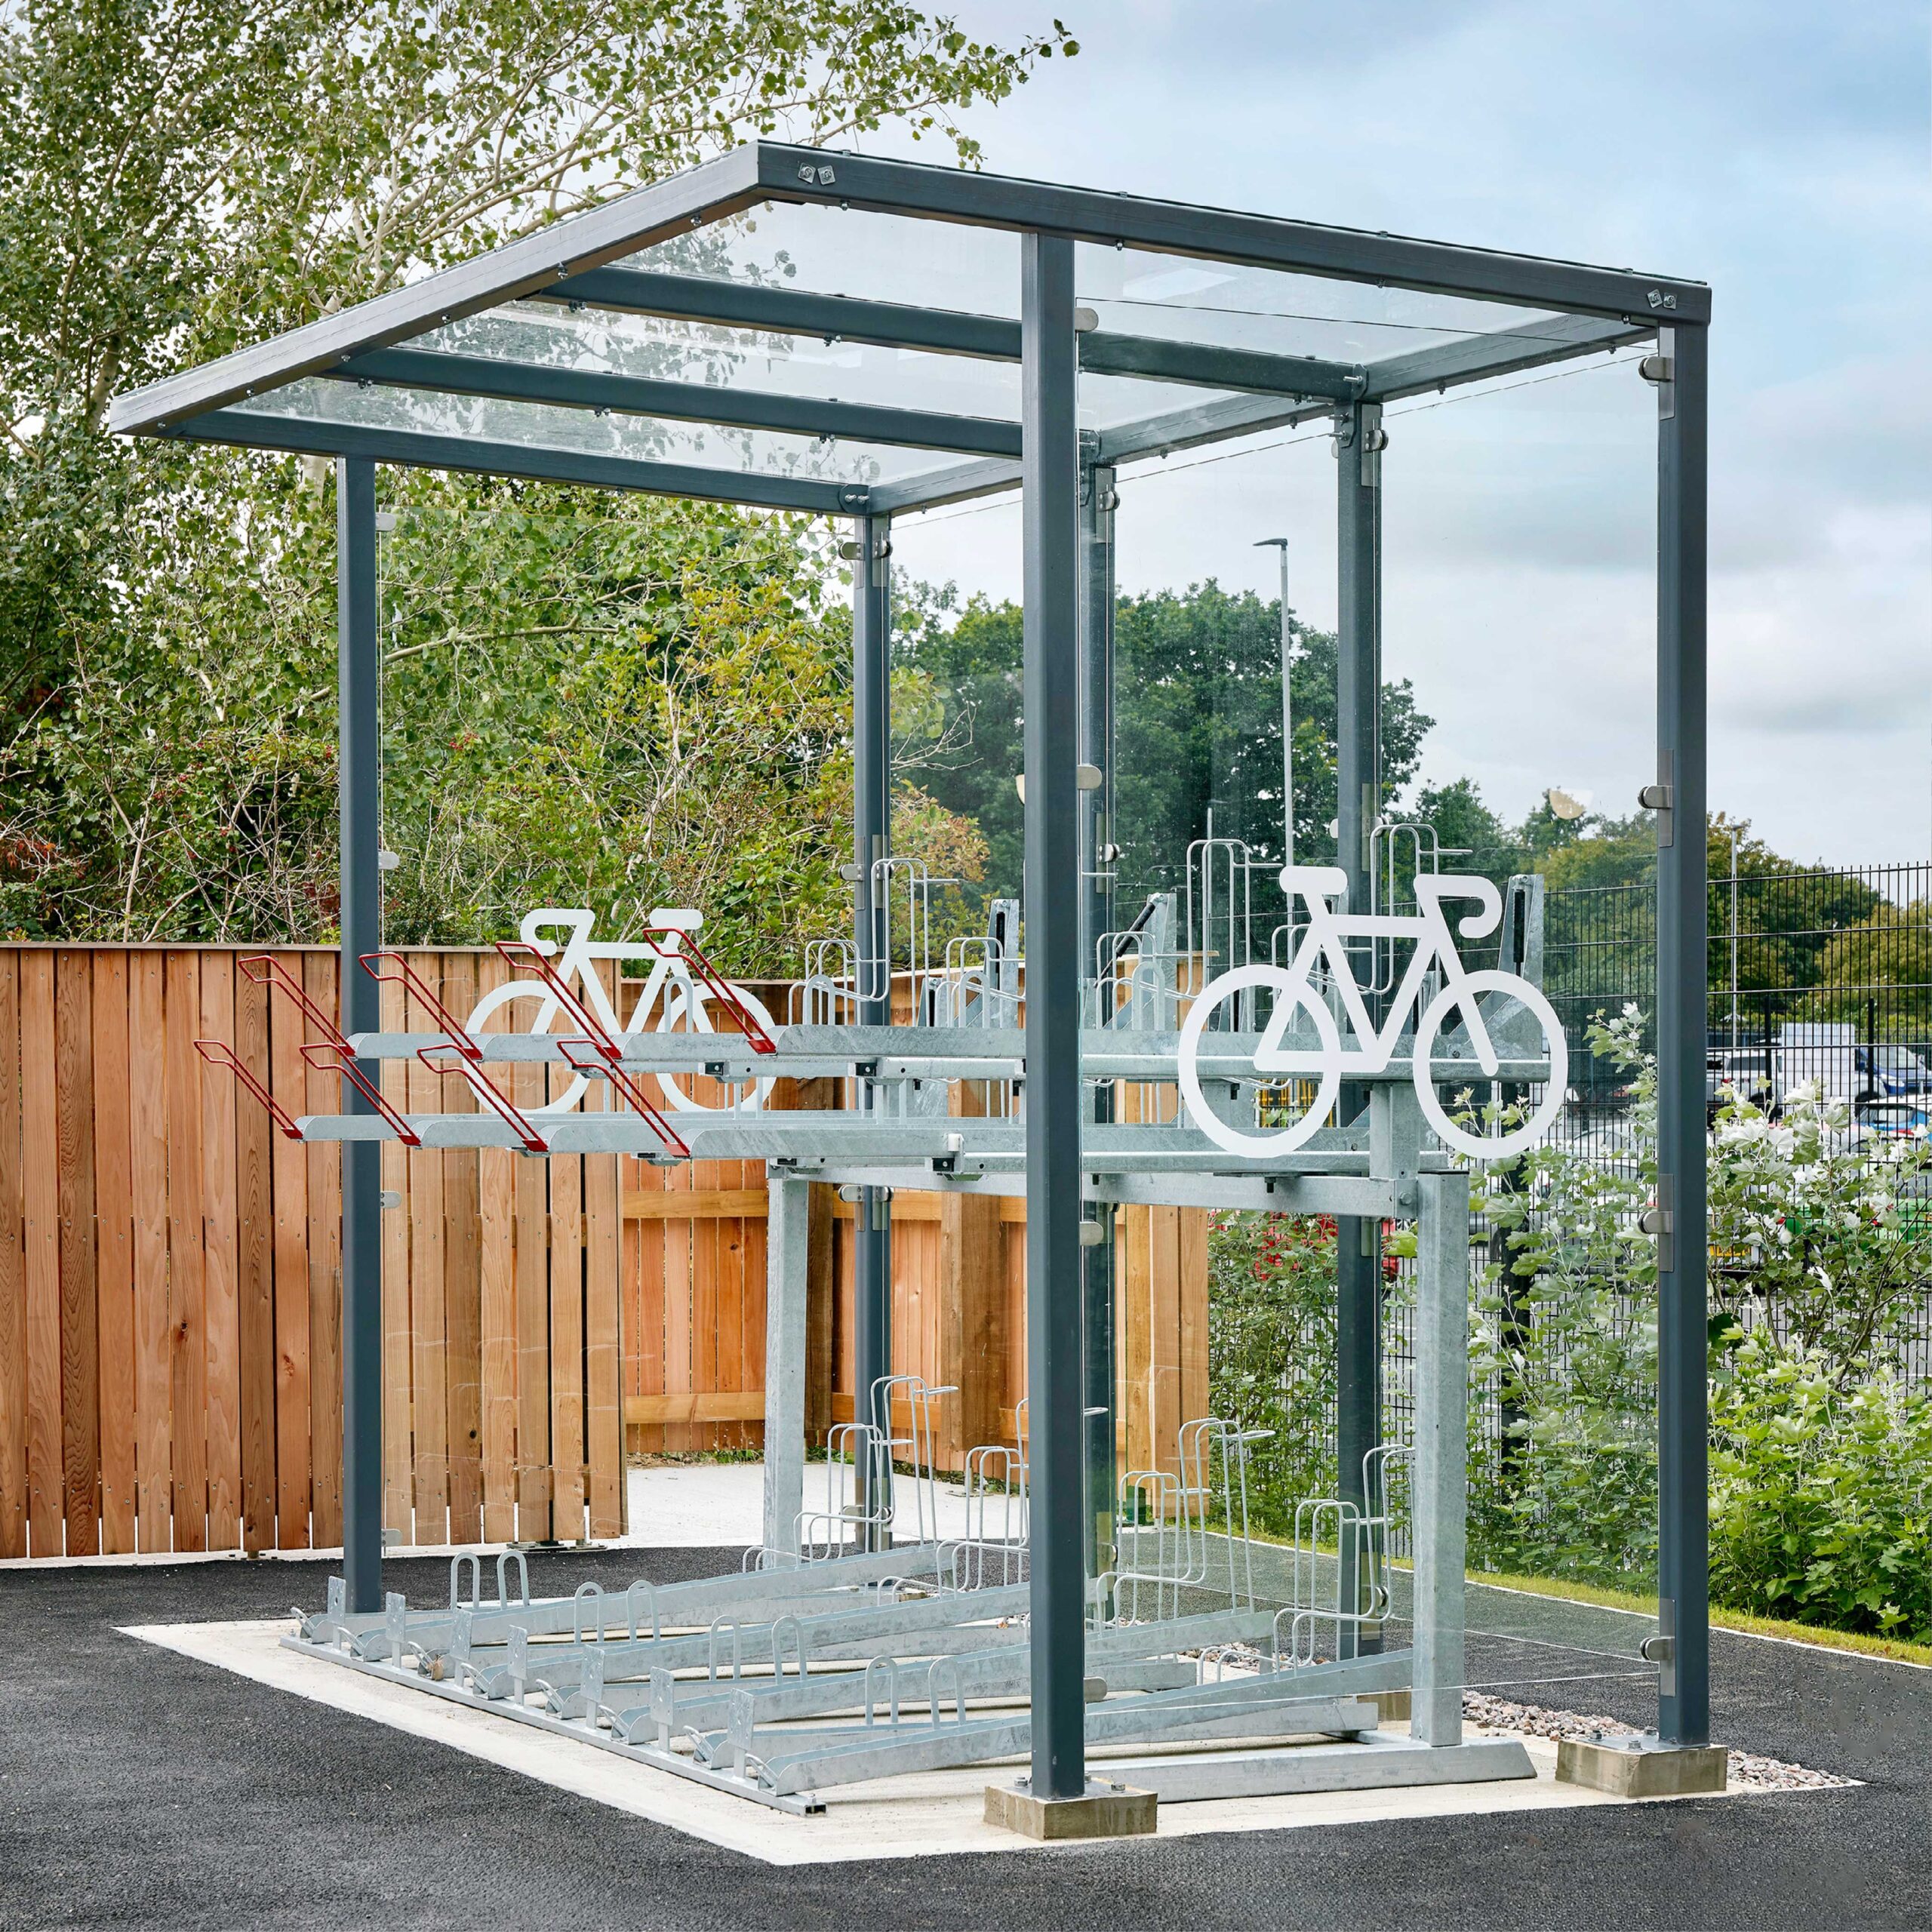 A modern outdoor bicycle parking shelter equipped with secured bike racks and surrounded by greenery and a wooden fence.